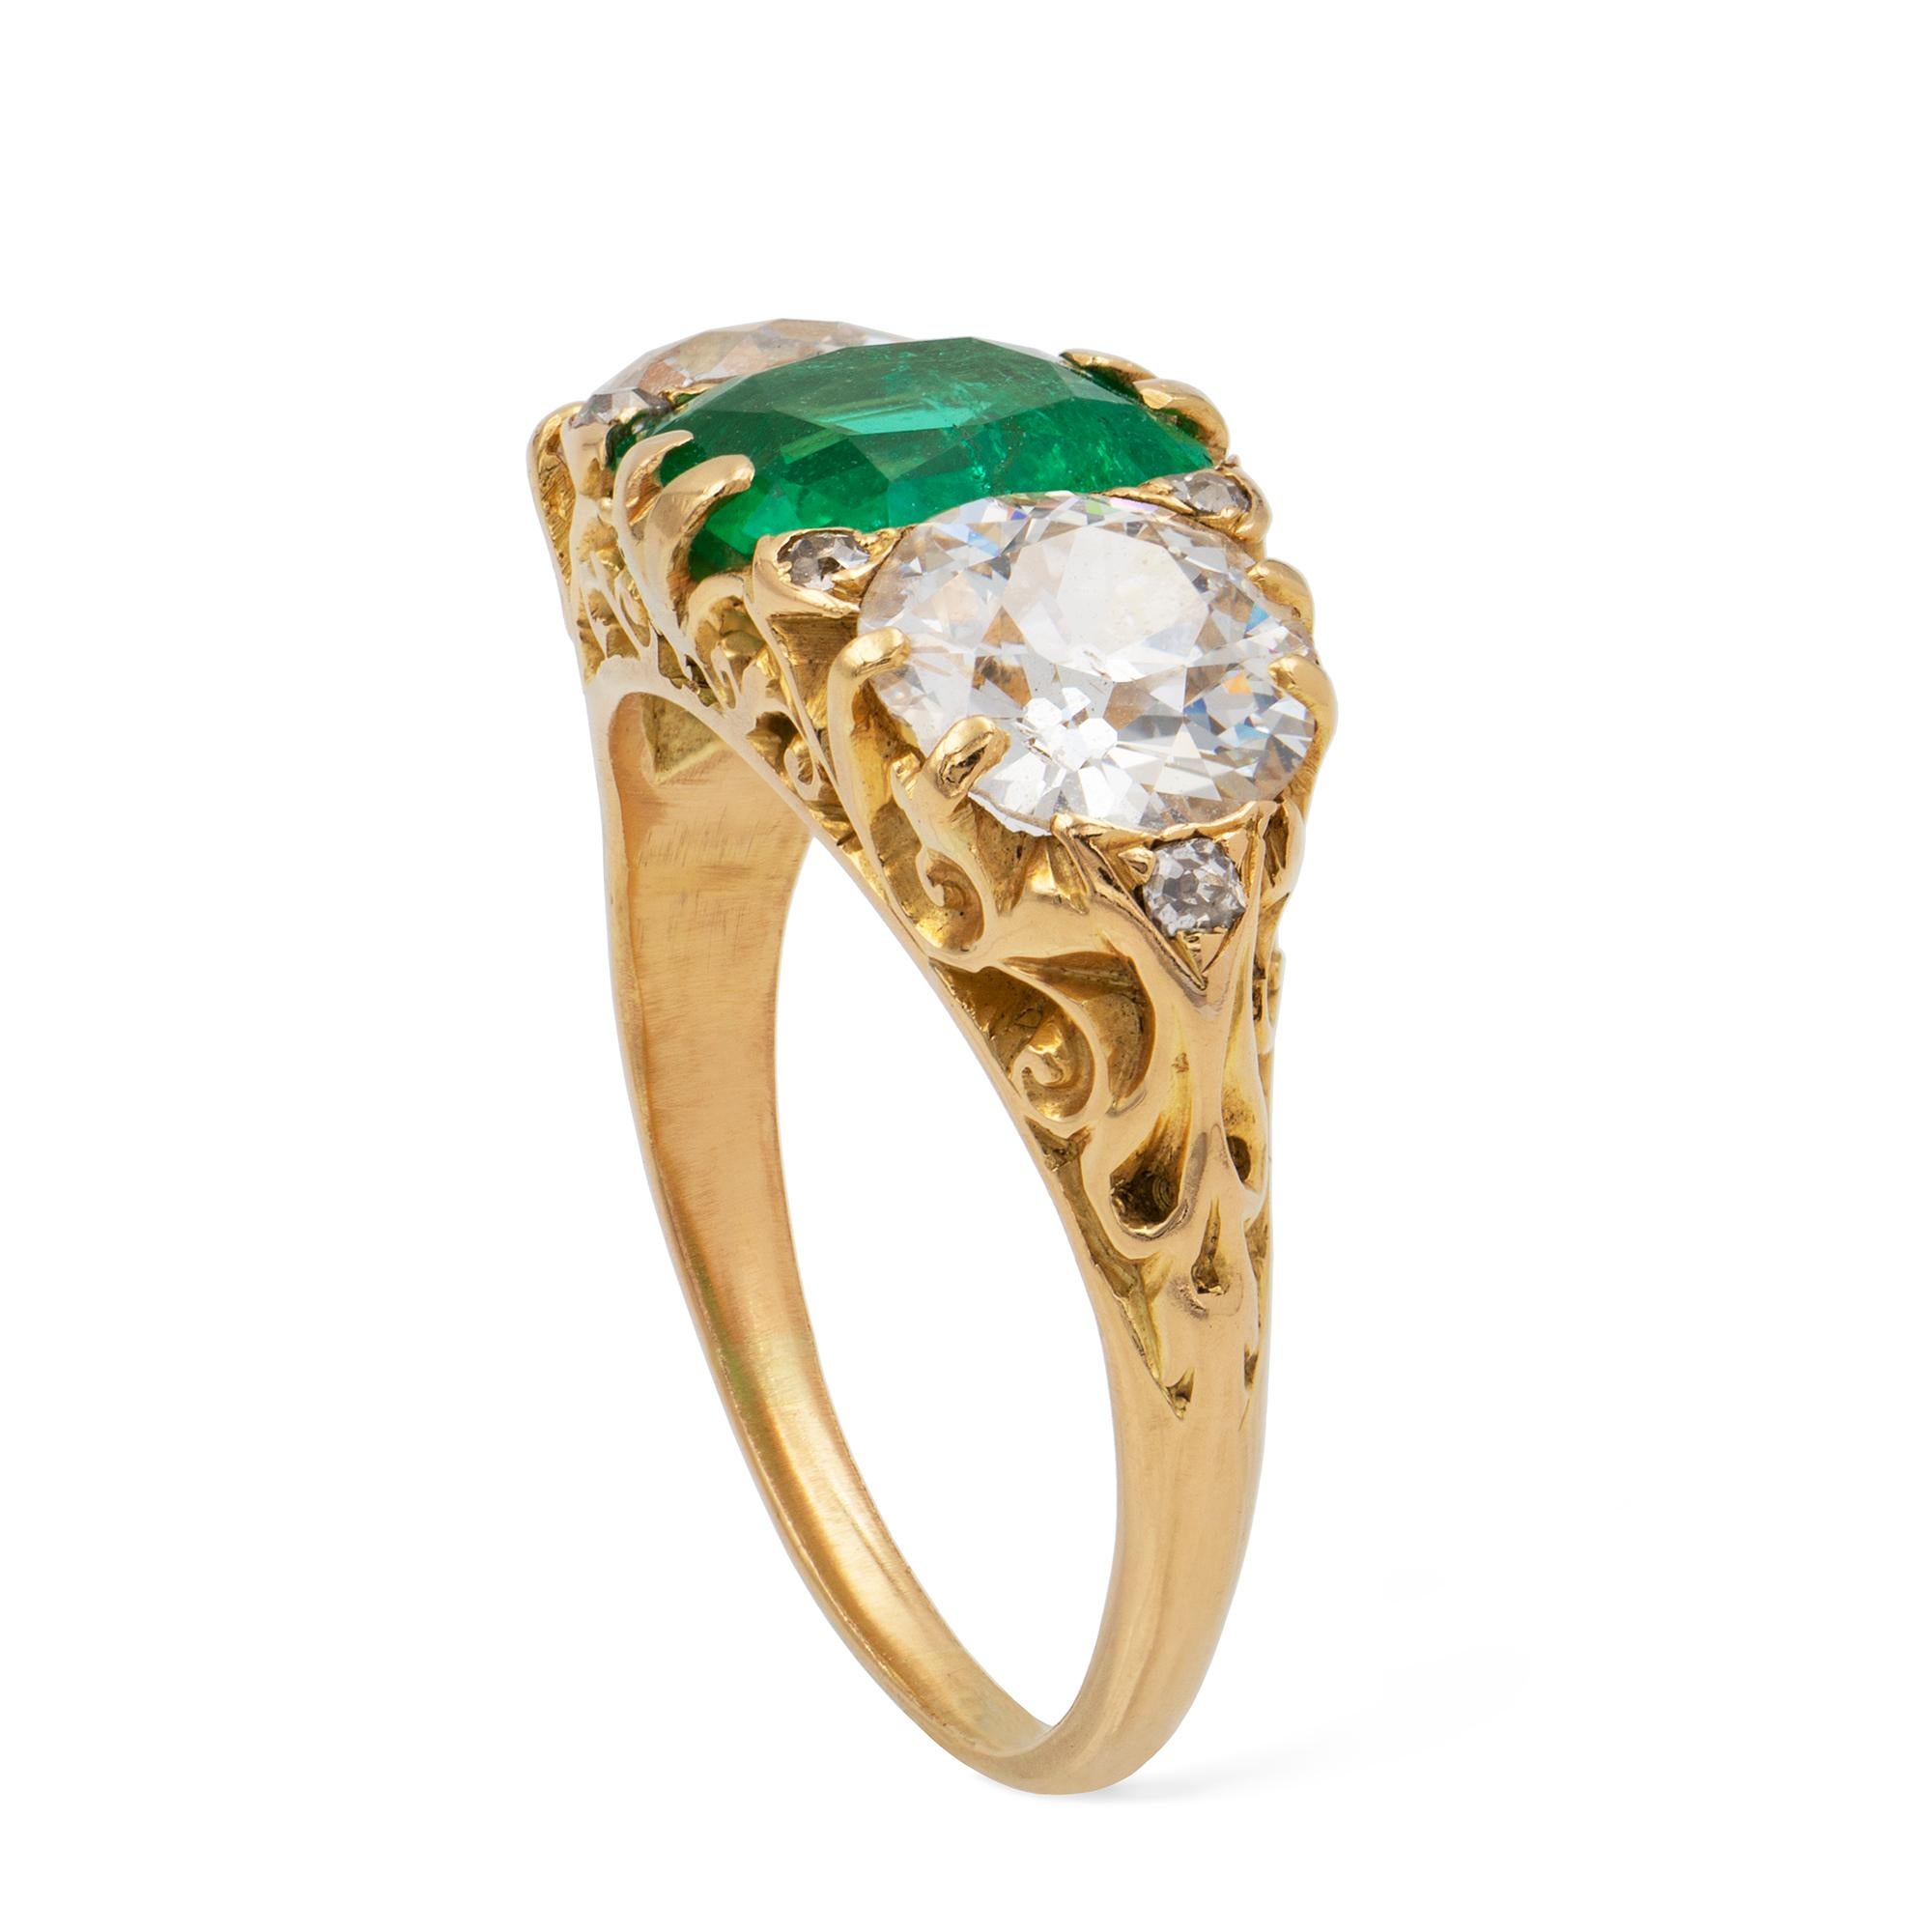 A Victorian emerald and diamond three-stone ring, the cushion-shape faceted emerald, weighing 1.88 carats, set between two round old European-cut diamonds weighing 2.30 carats in total, all claw-set with old-cut diamonds in-between, to a gold mount